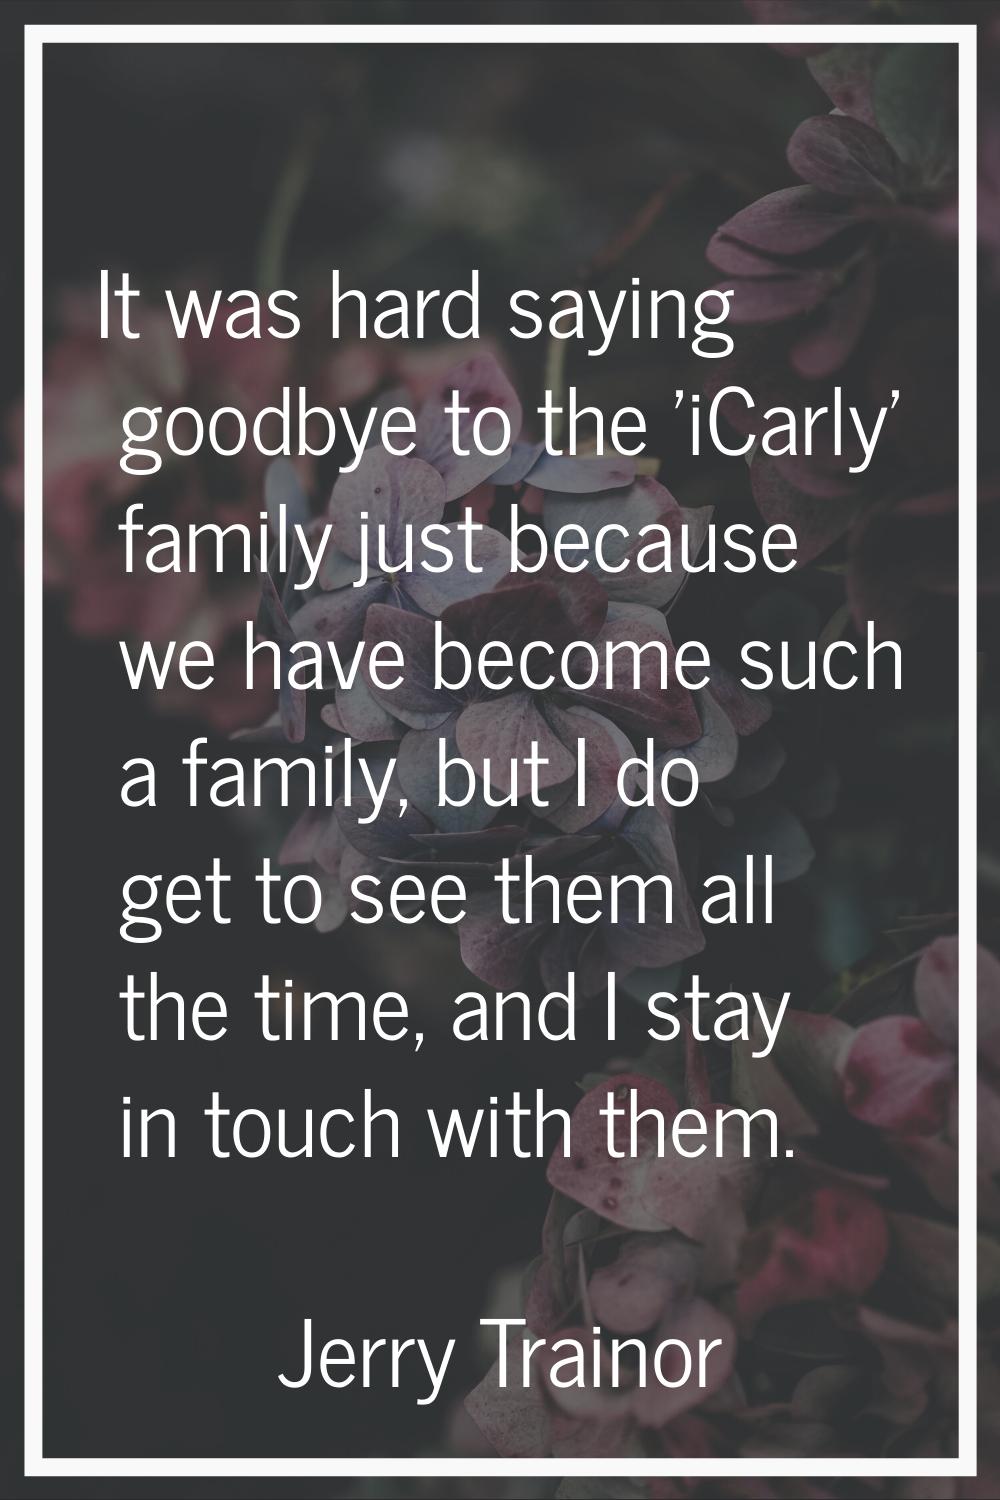 It was hard saying goodbye to the 'iCarly' family just because we have become such a family, but I 